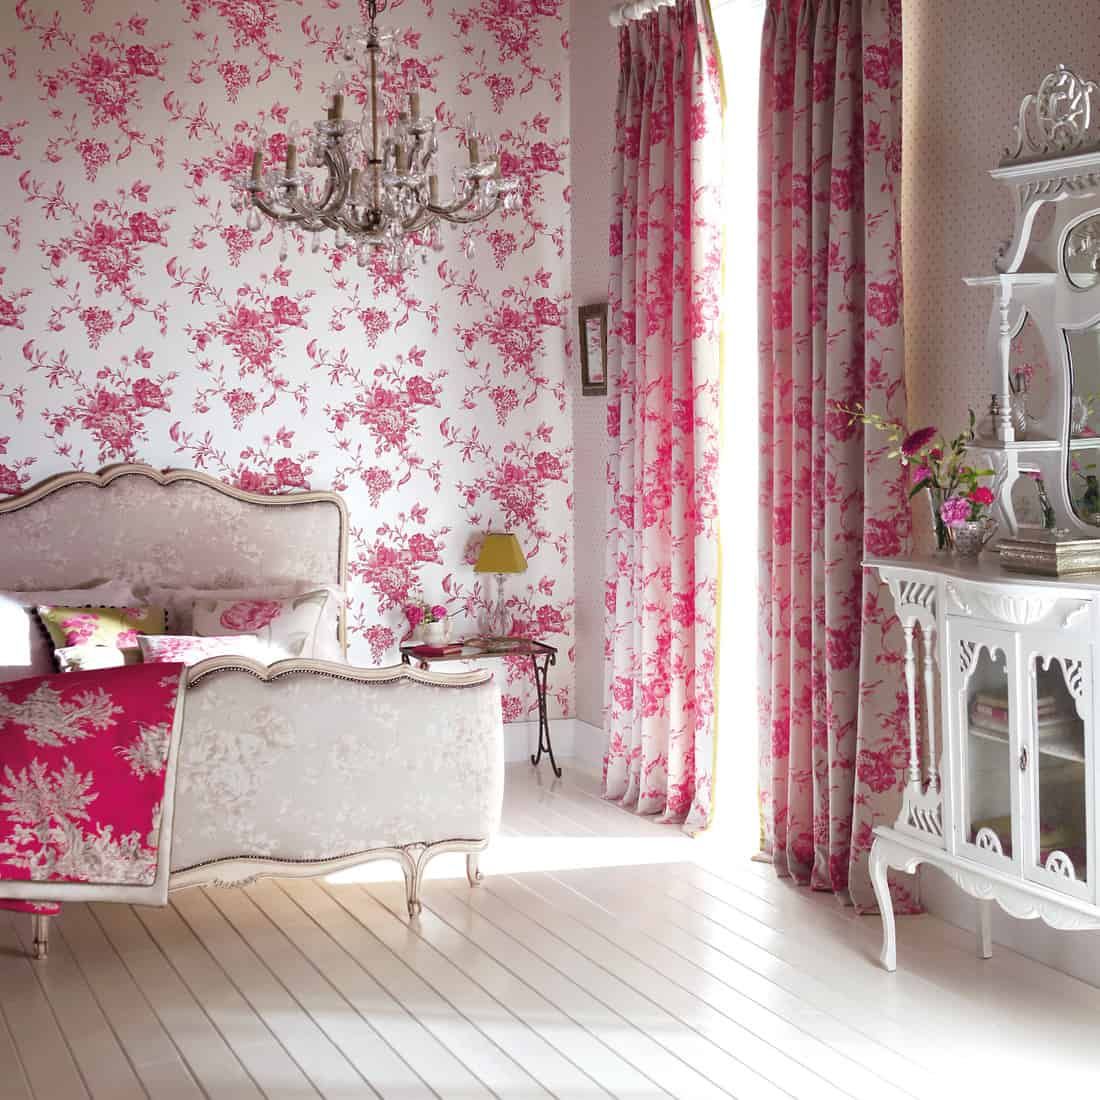 Creative and Stylish Solutions for Small Teenage Girls’ Bedrooms